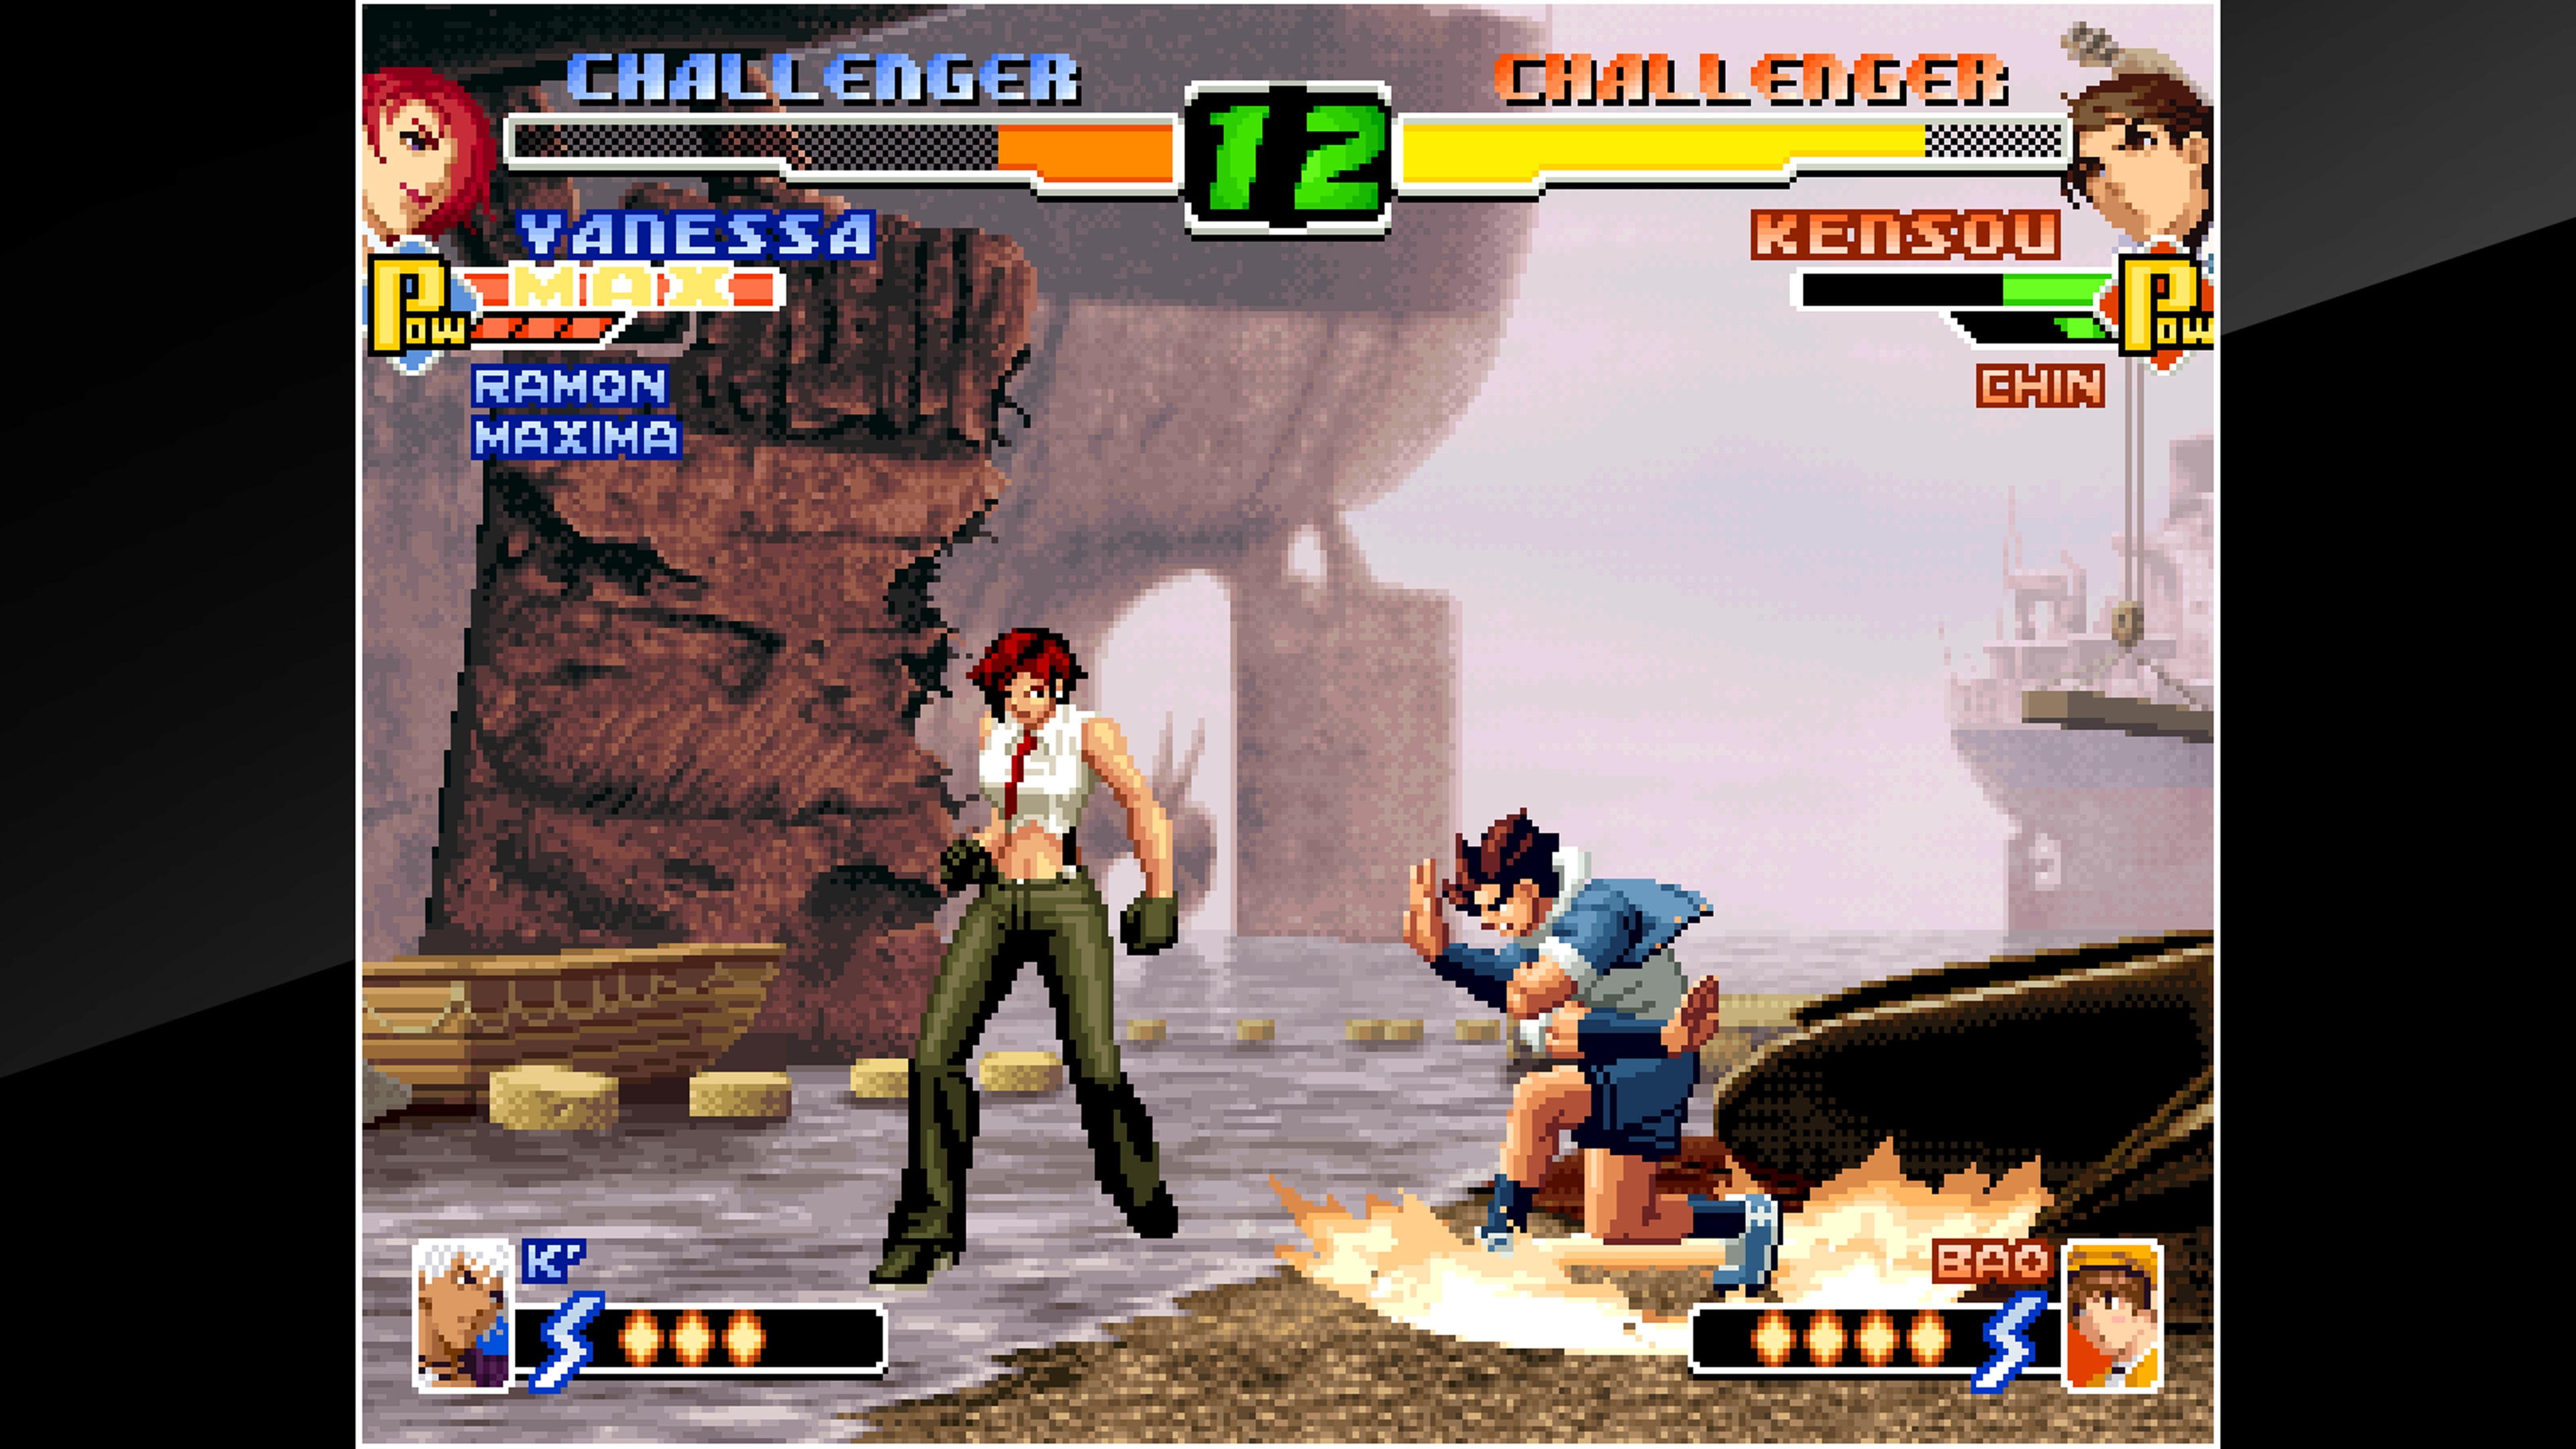 Classic Fighter The King of Fighters 2000 ACA NeoGeo From SNK and